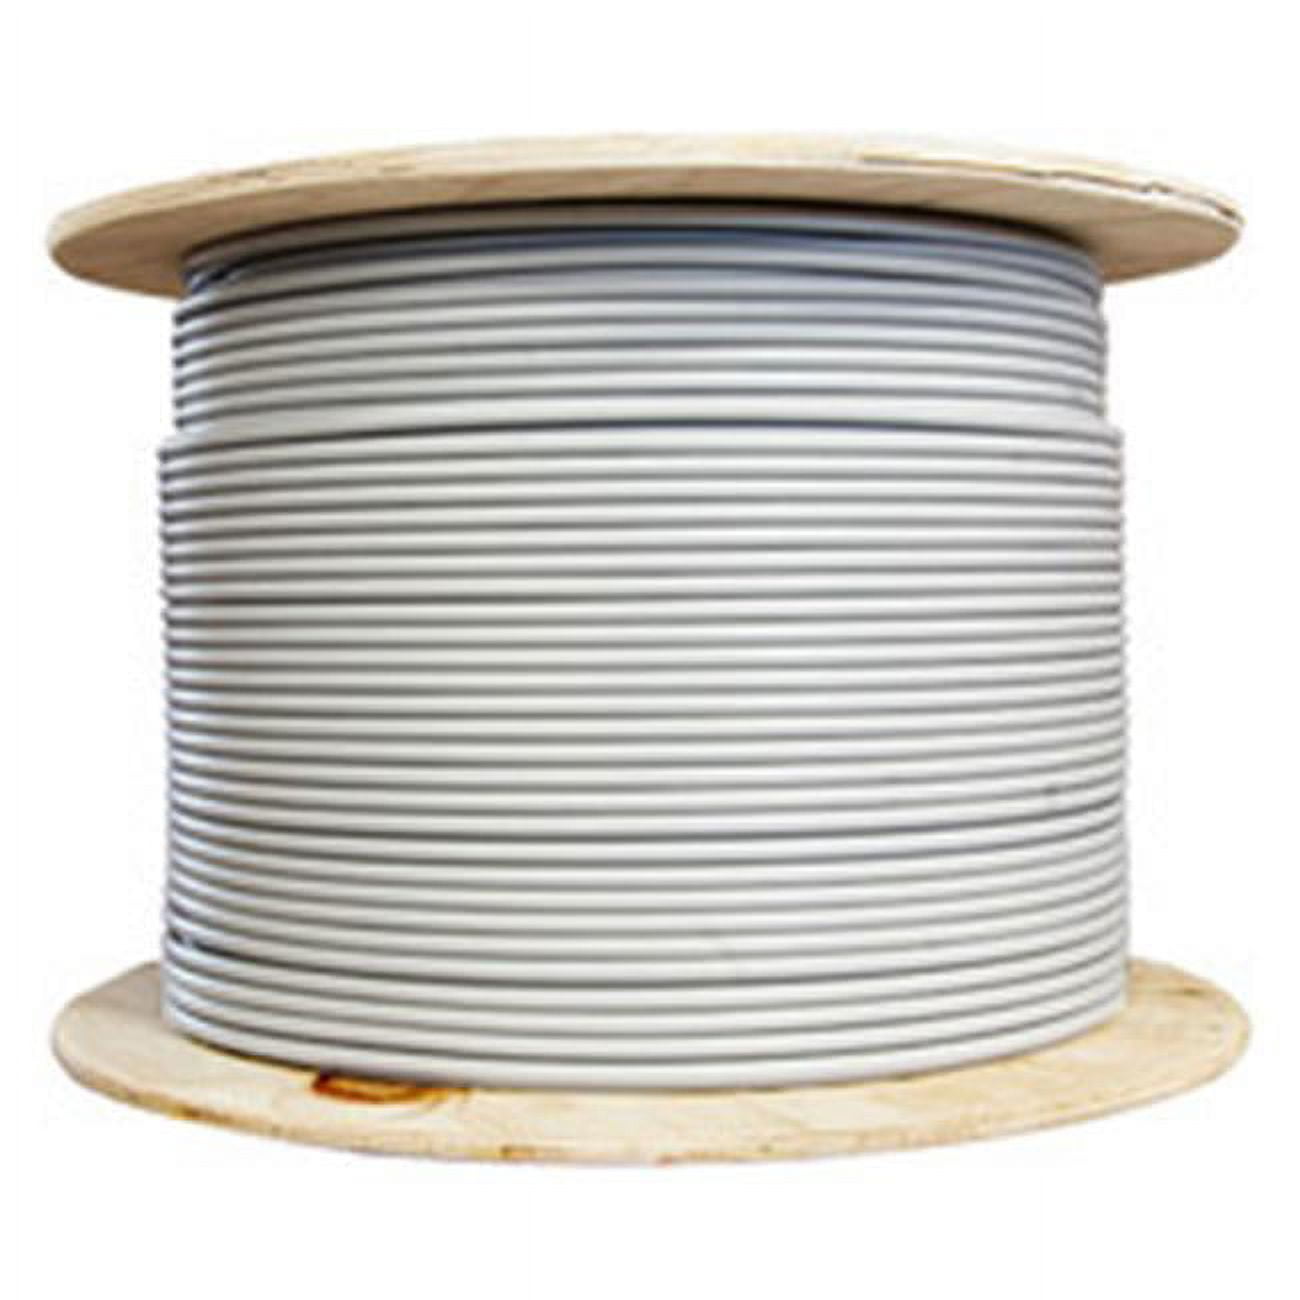 Picture of CableWholesale 13X6-021MH 100 ft. Bulk Cat6a Gray Ethernet Cable with Stranded Unshielded Twisted Pair, Spool